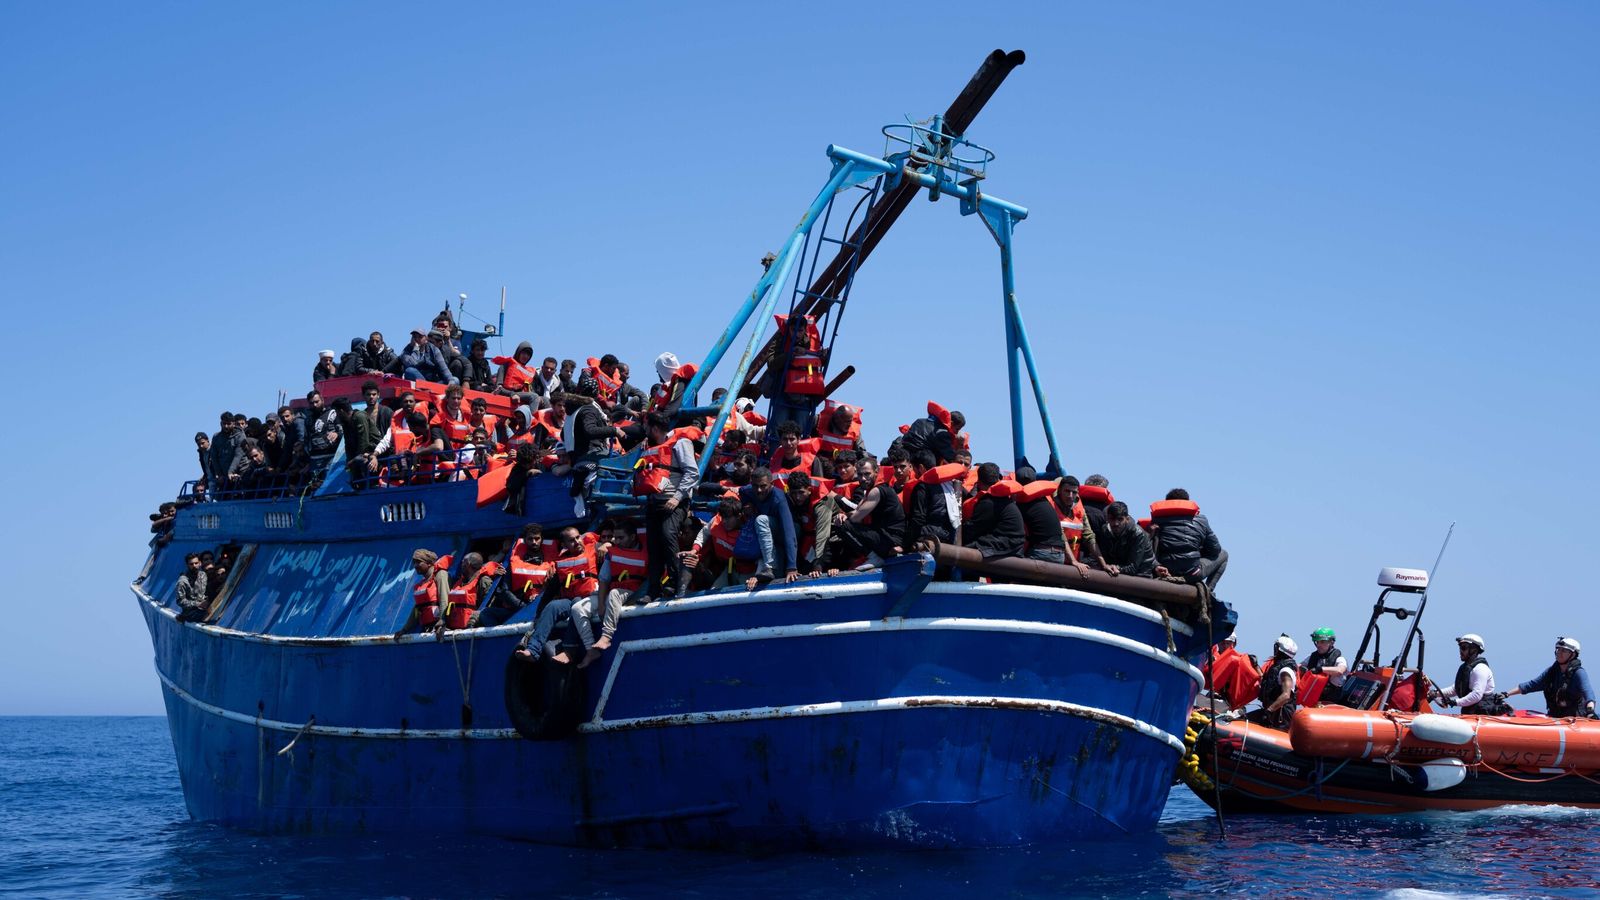 On board the mission to rescue 600 people from overcrowded fishing boat abandoned by its captain